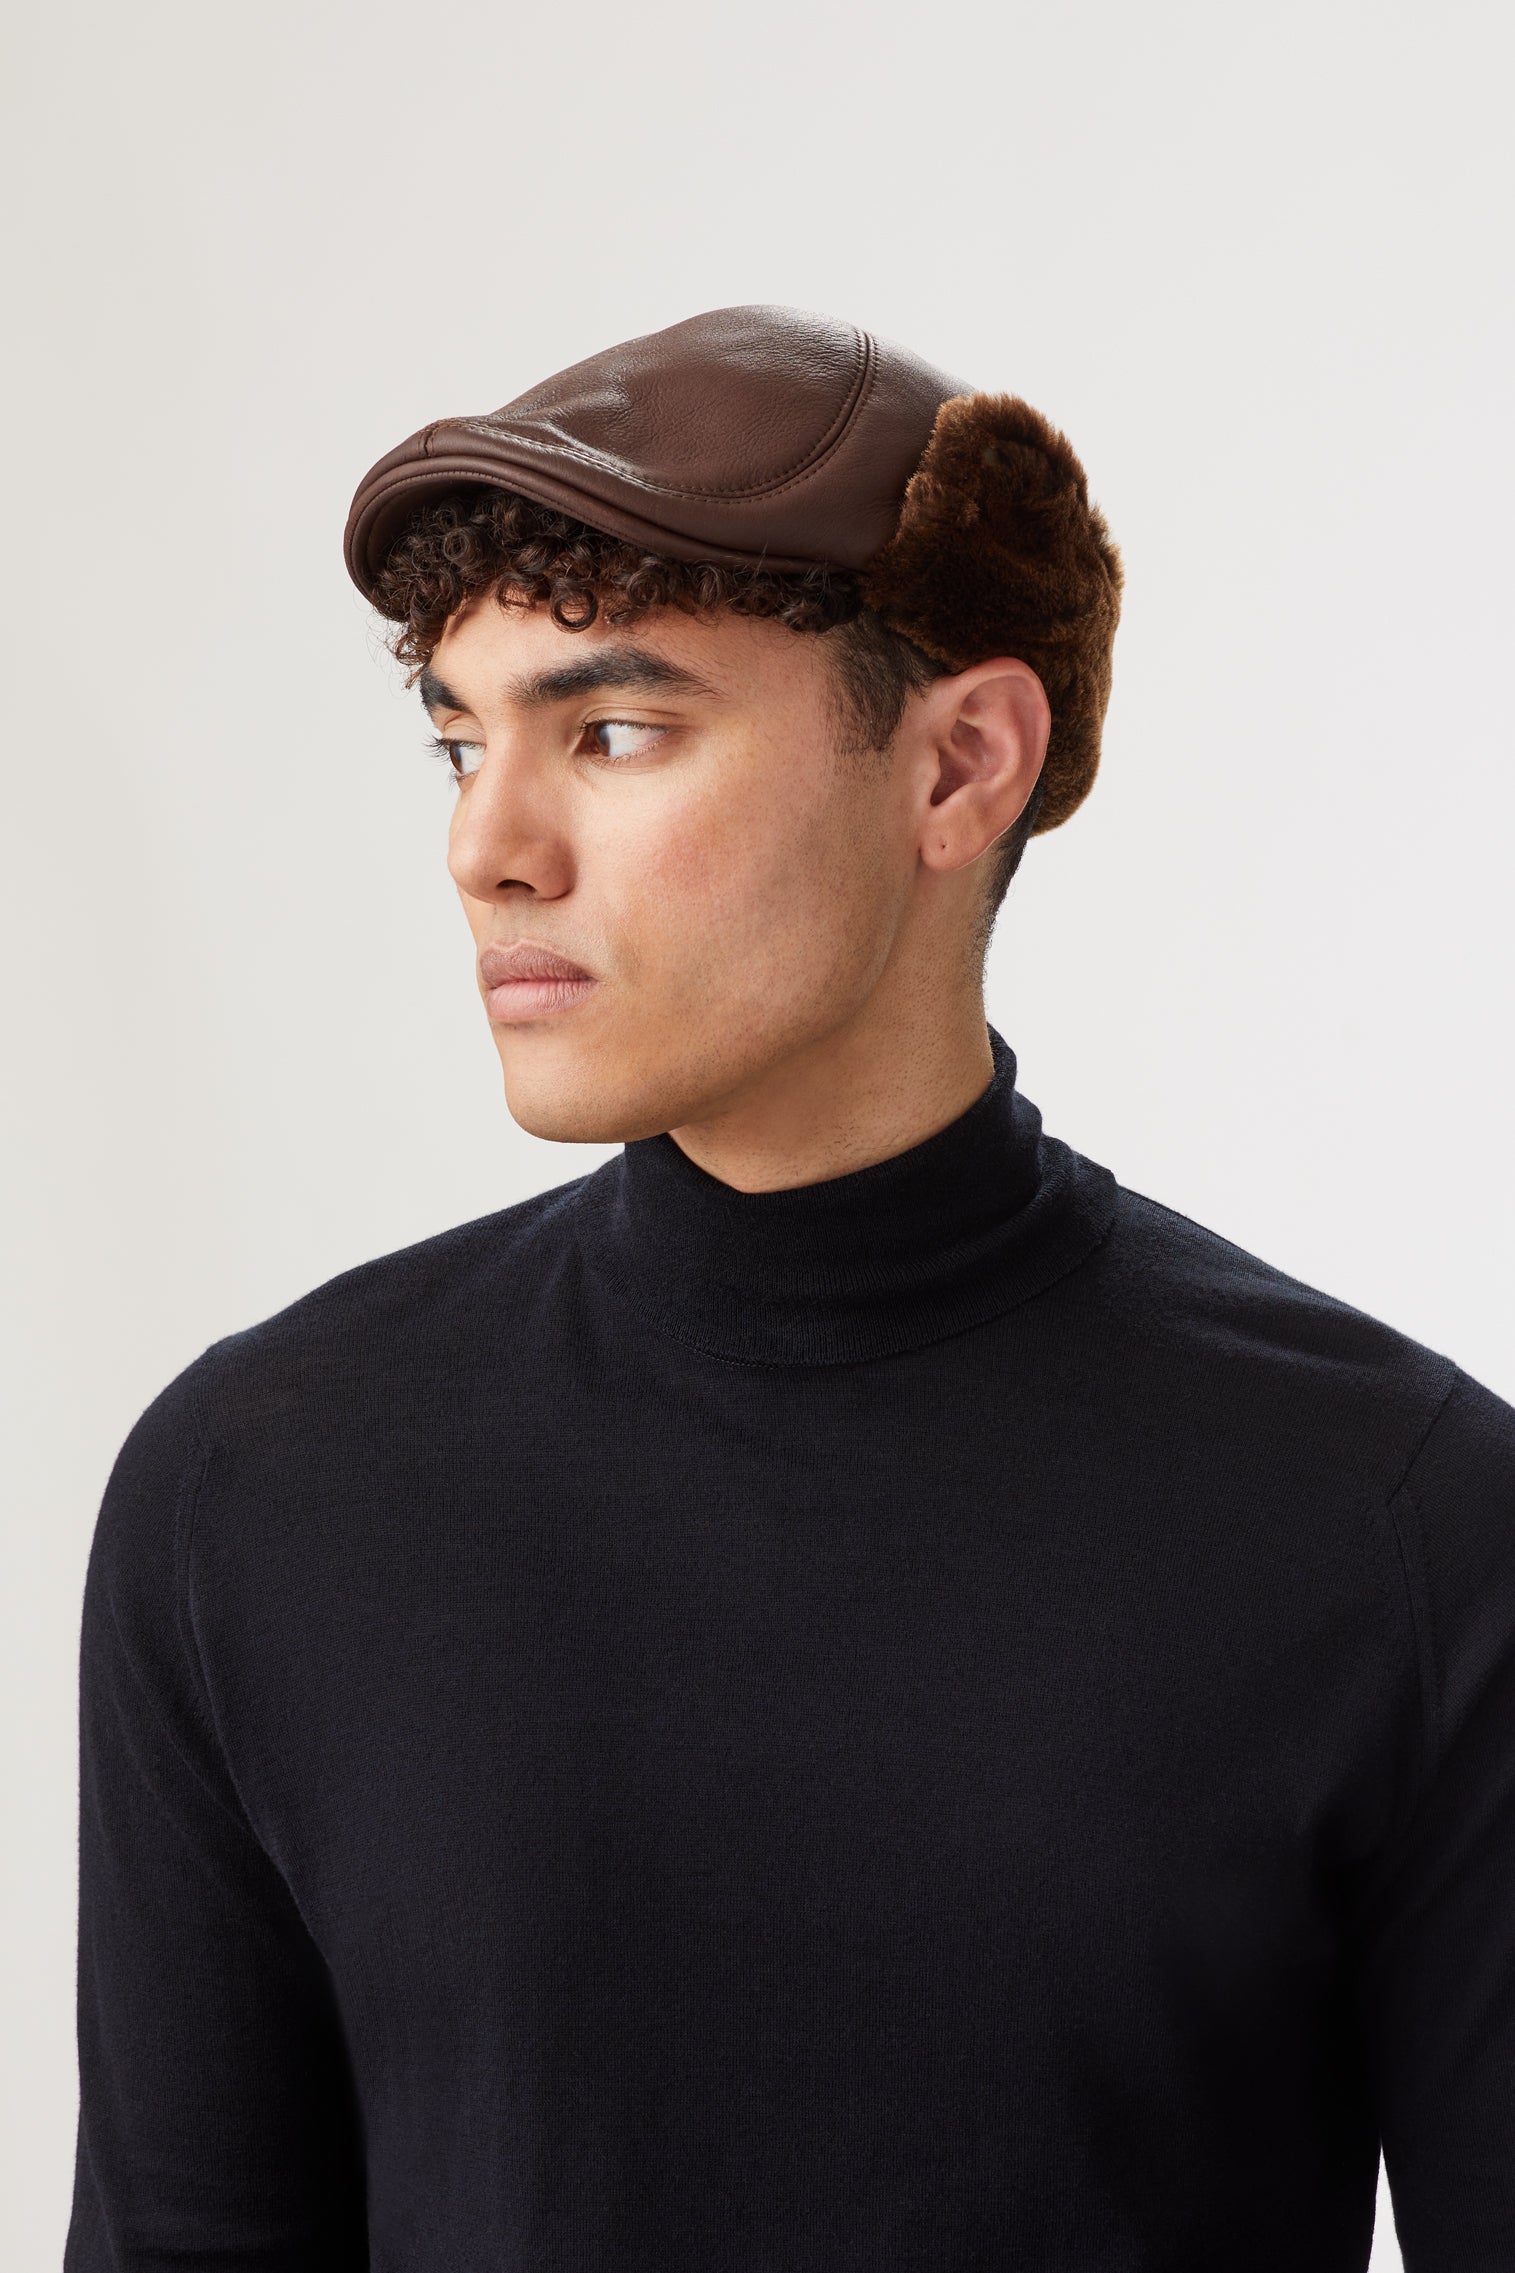 Alberta Leather Flat Cap - Hats for Tall People - Lock & Co. Hatters London UK